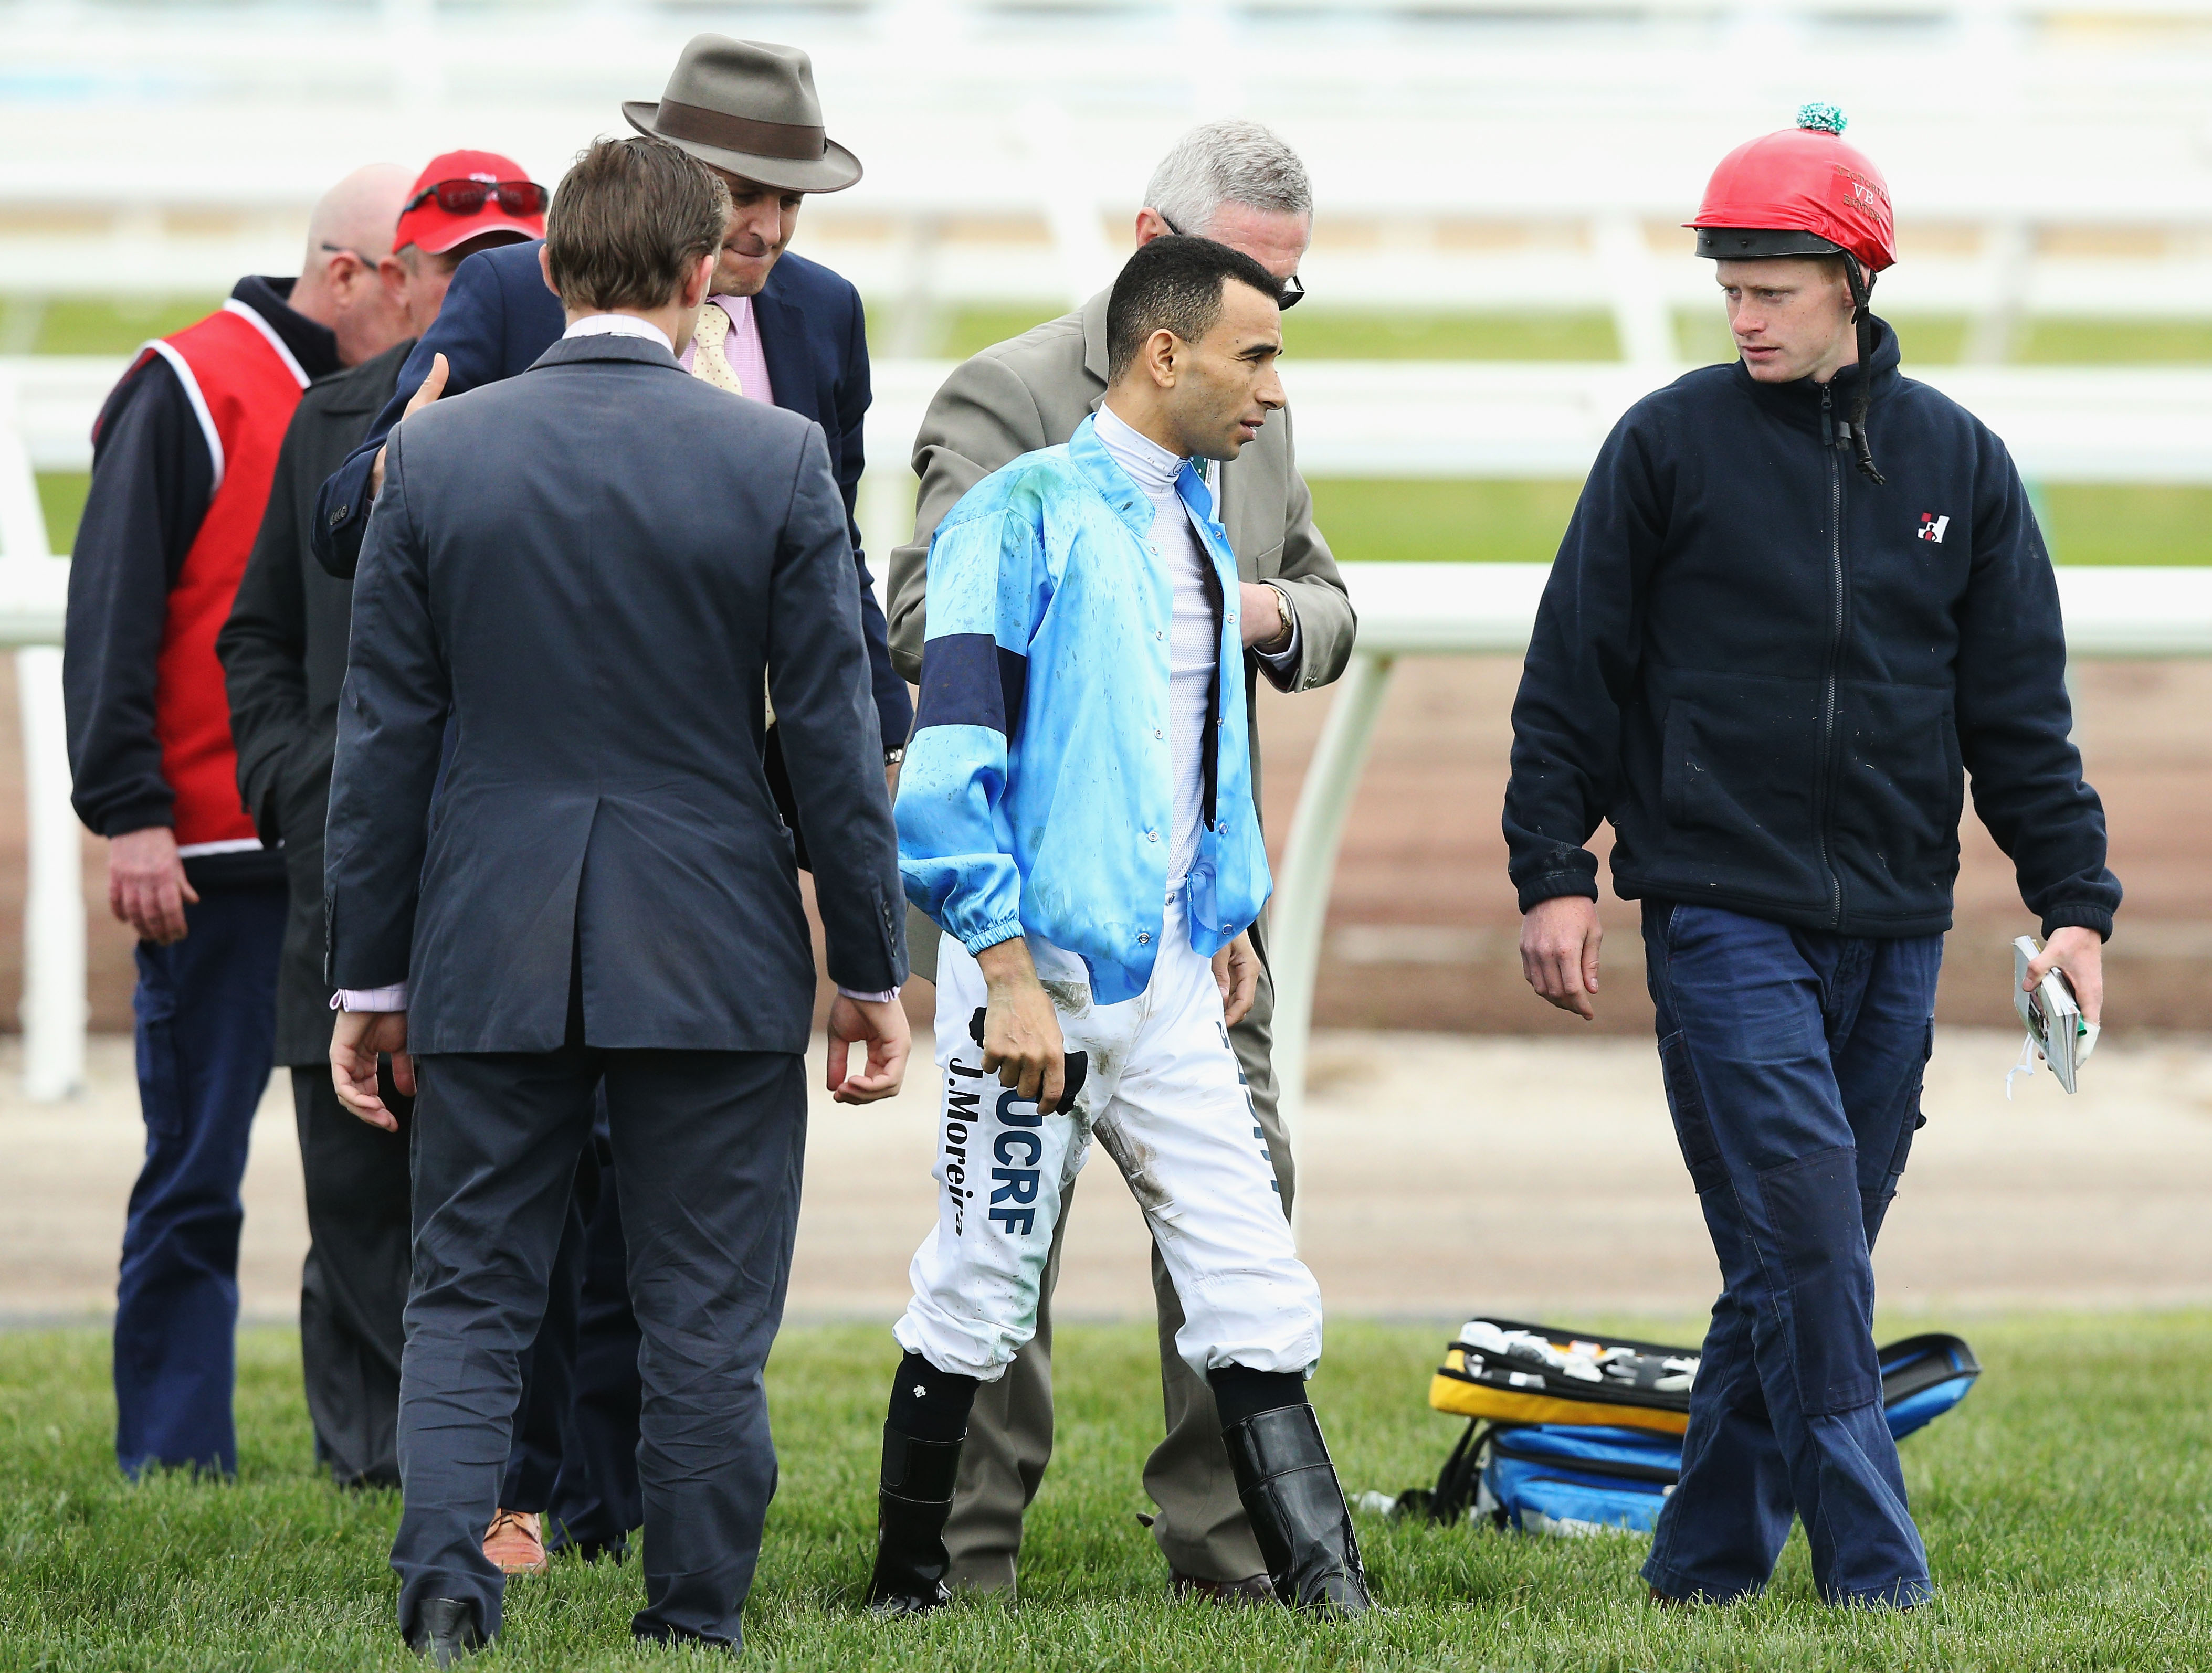 Horse Racing Star Jockey Joao Moreira Out Of Melbourne Cup After Horror Fall Nz Herald